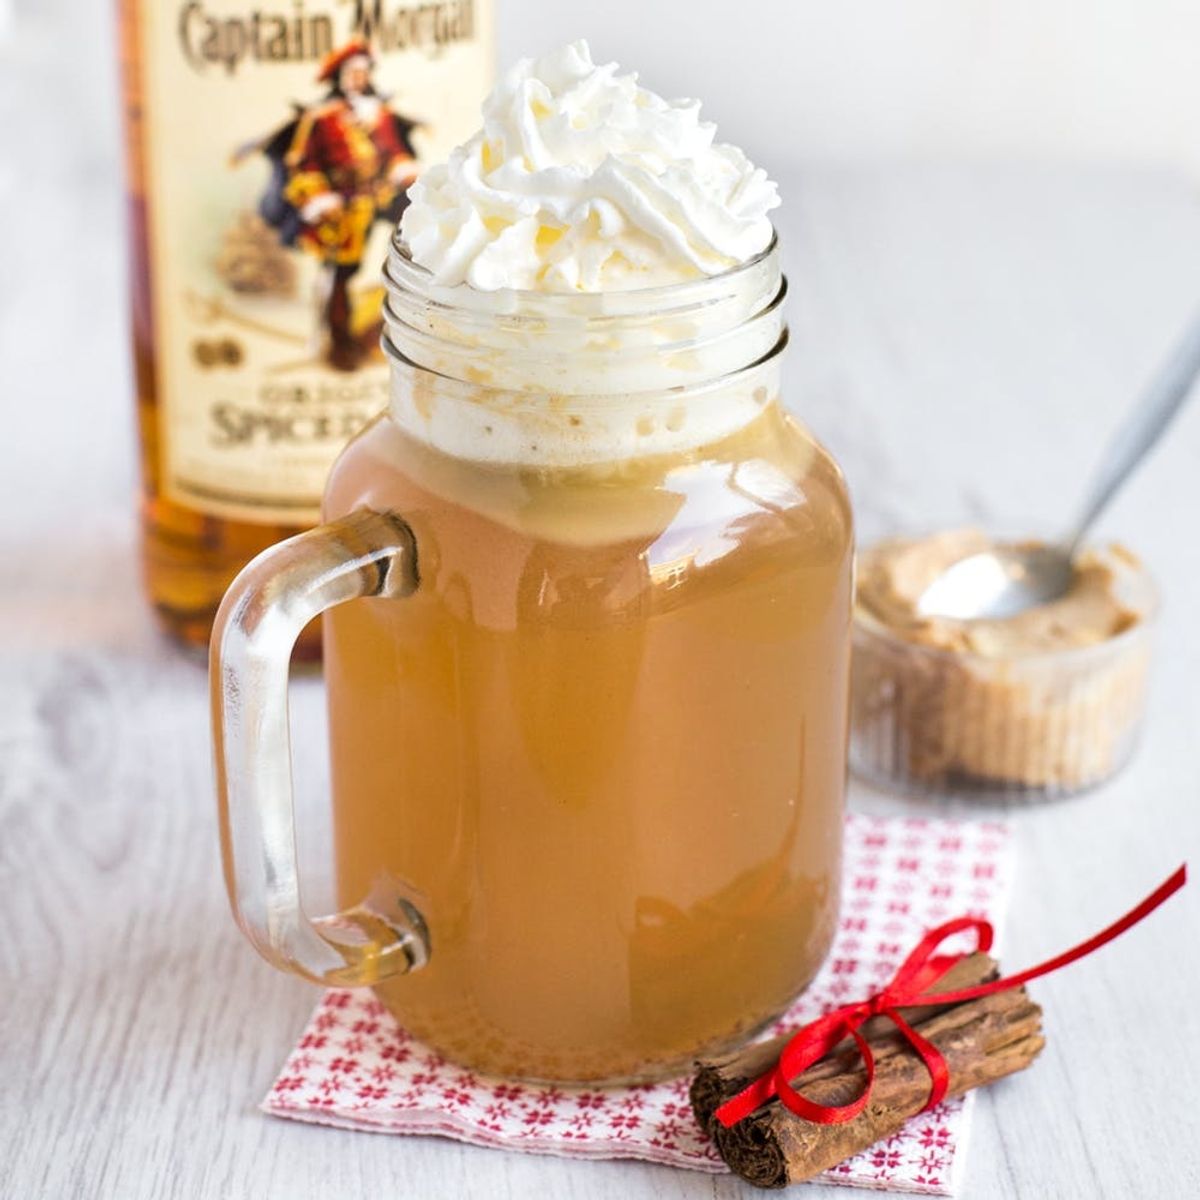 Warm Up Your Winter With Hot Buttered Rum!